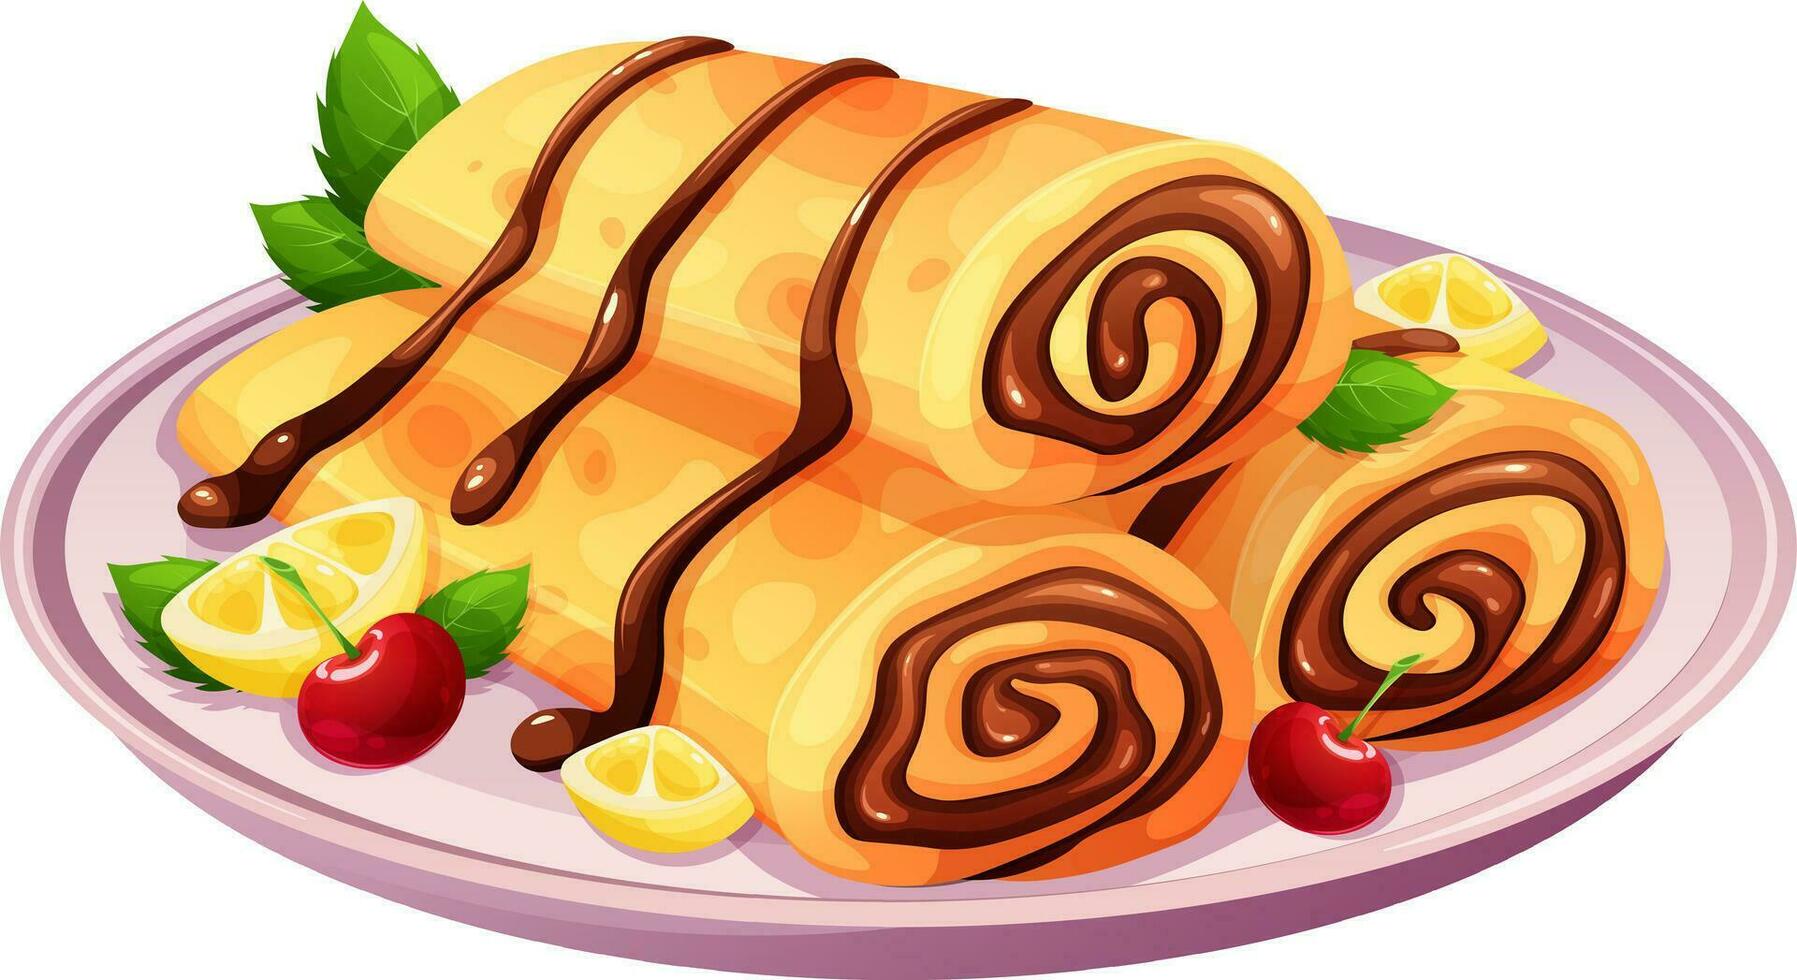 Stack of thin pancakes rolled into tube with chocolate and fruit. Vector illustration for Pancake Day and traditional breakfast in cartoon style